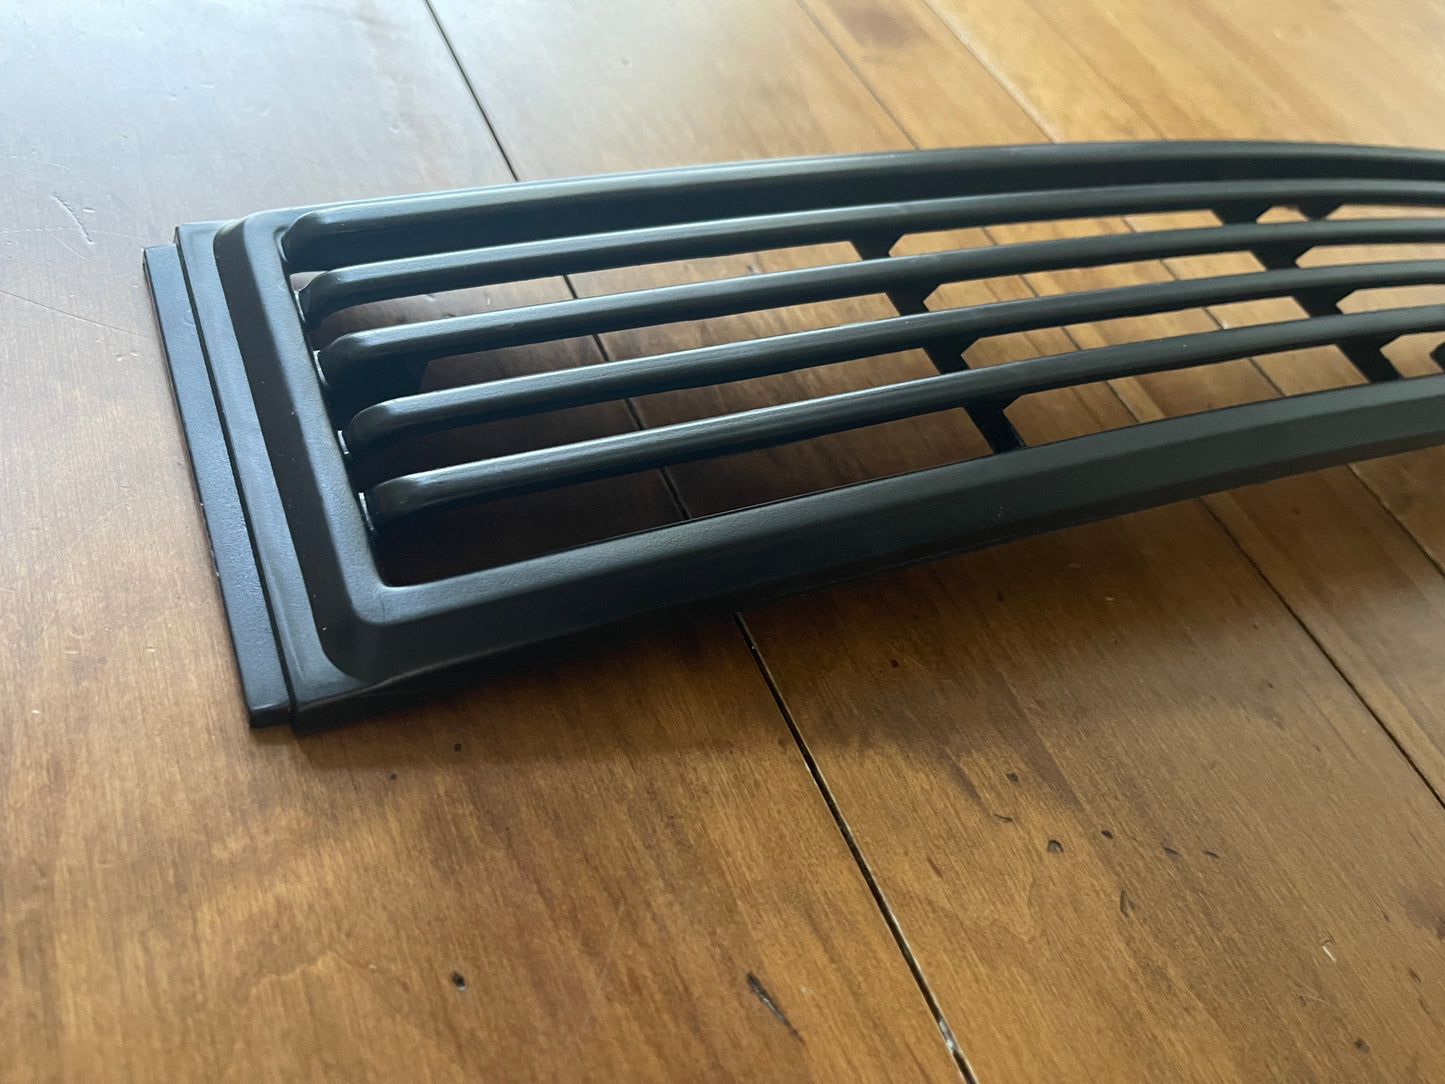 NOS Genuine VW Brazilian Bus Style Plastic Front Grill